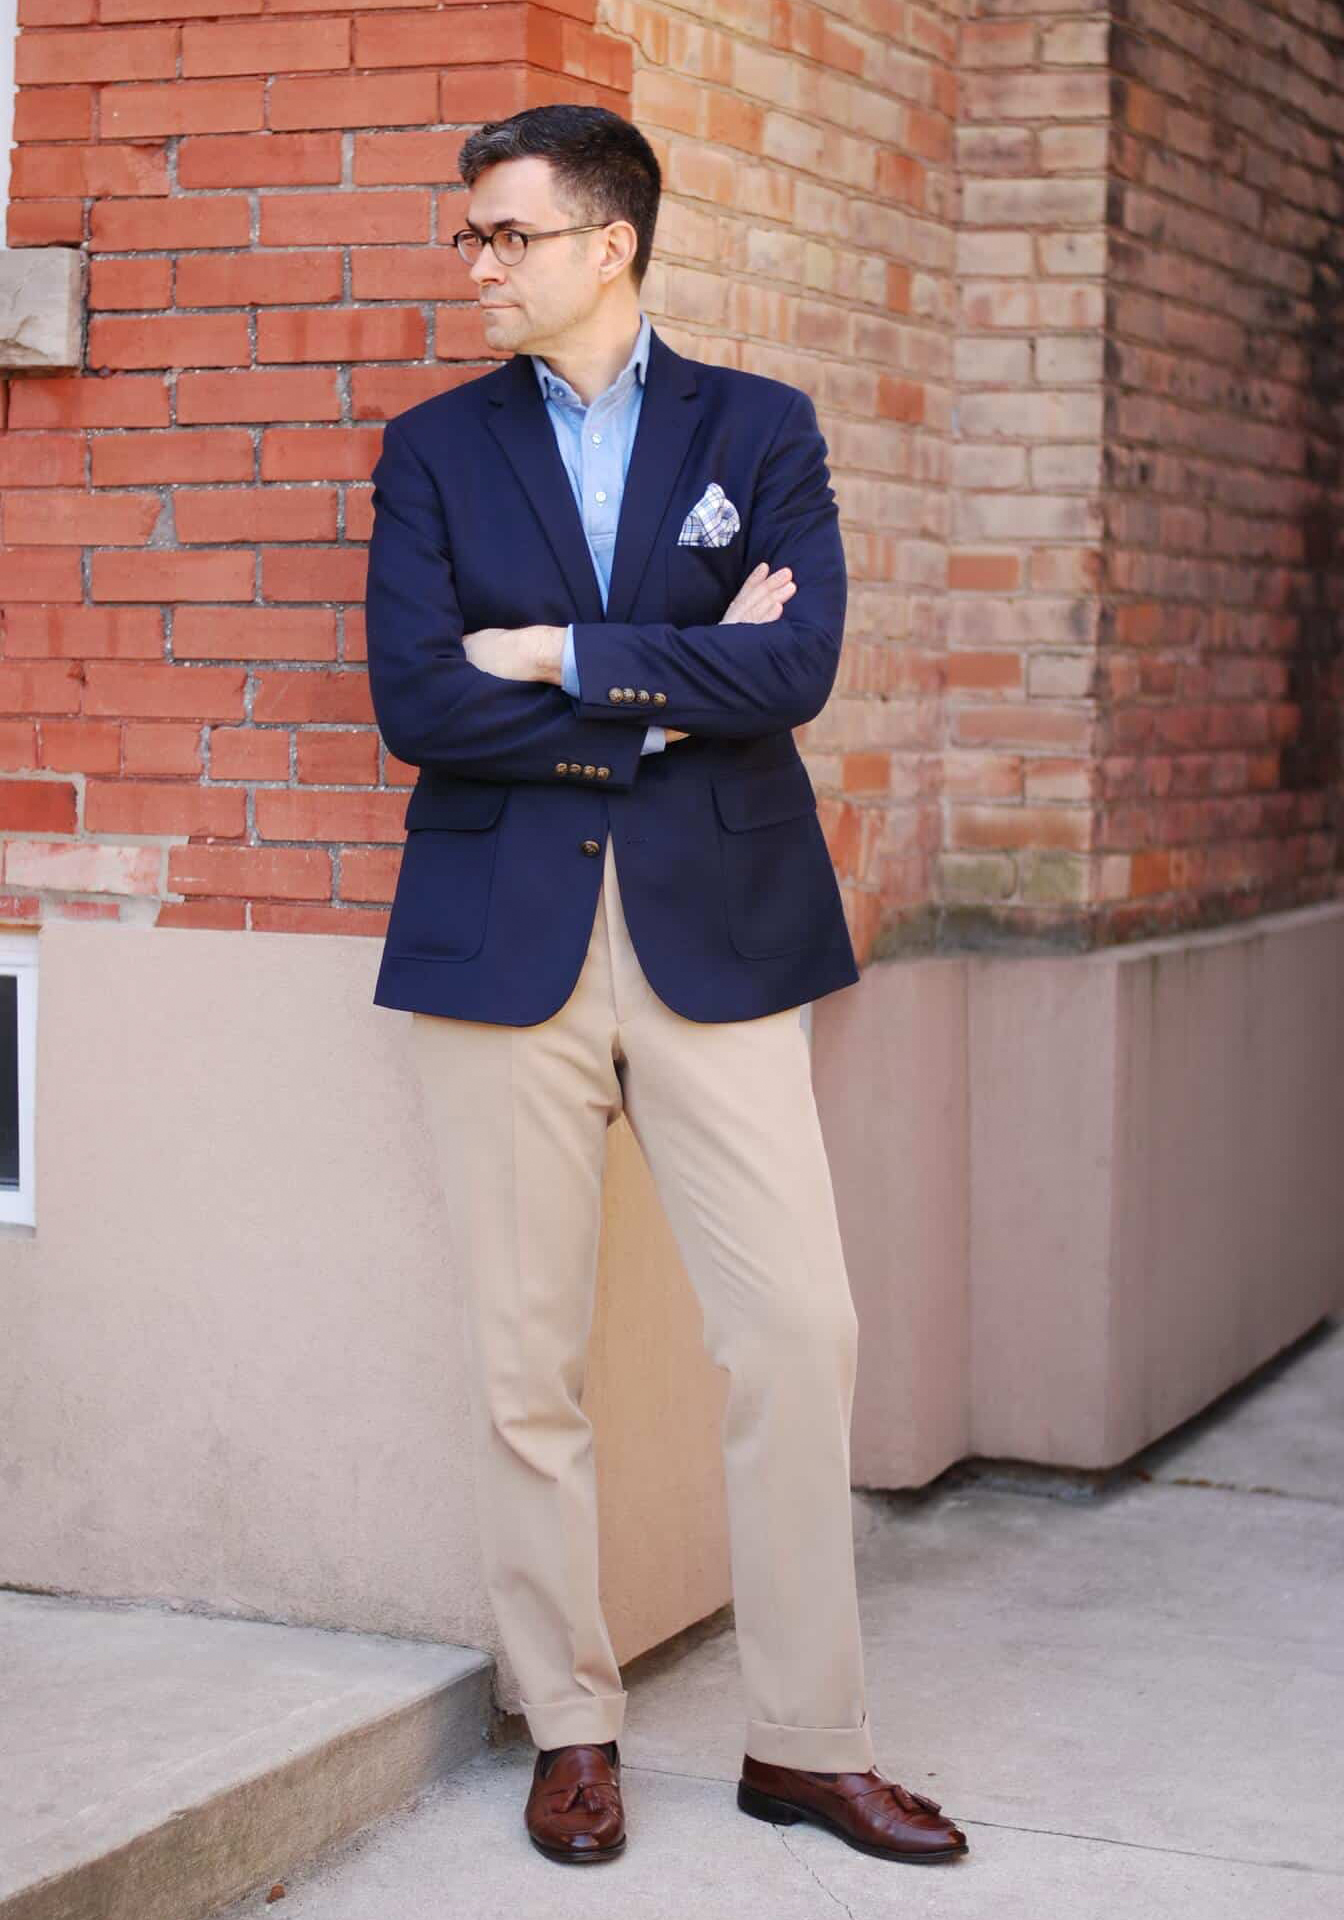 Navy suit jacket, blue shirt, tan pants, and brown tassel loafers